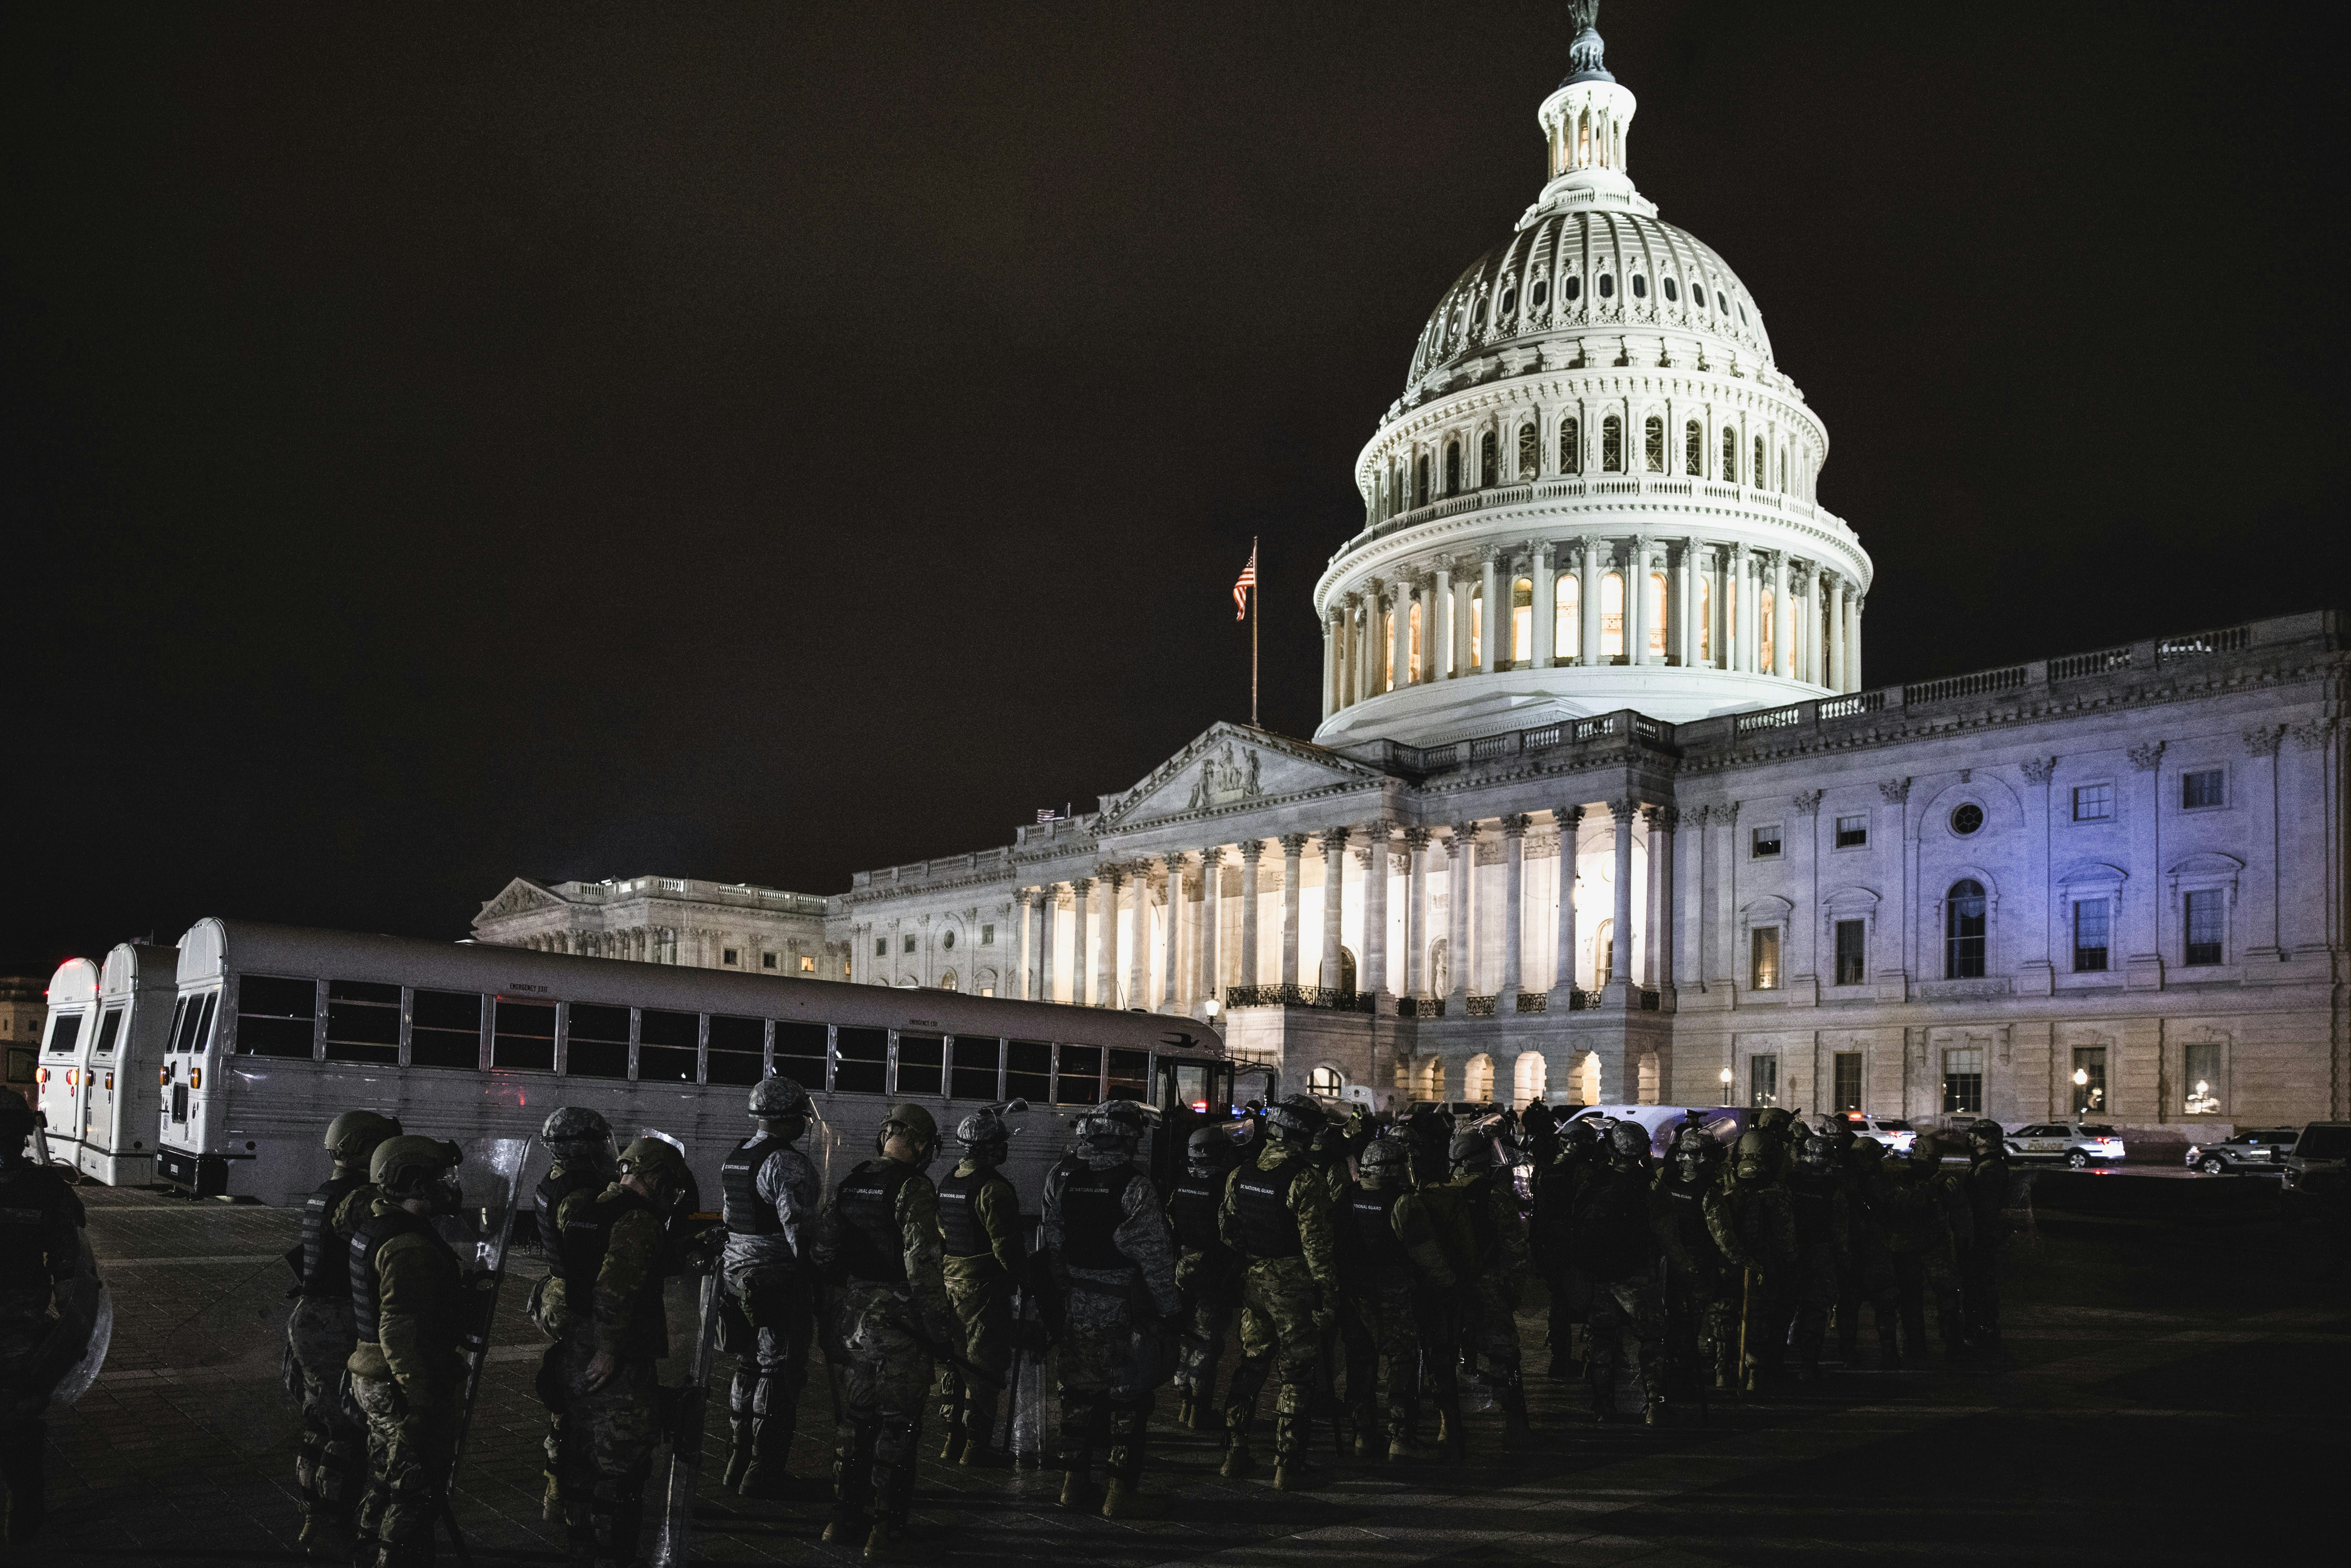 WASHINGTON, DC - JANUARY 06: Members of the National Guard and the Washington D.C. police stand guard to keep demonstrators away from the U.S. Capitol on January 06, 2021 in Washington, DC. A pro-Trump mob stormed the Capitol earlier, breaking windows and clashing with police officers. Trump supporters gathered in the nation's capital to protest the ratification of President-elect Joe Biden's Electoral College victory over President Donald Trump in the 2020 election. (Photo by Samuel Corum/Getty Images)